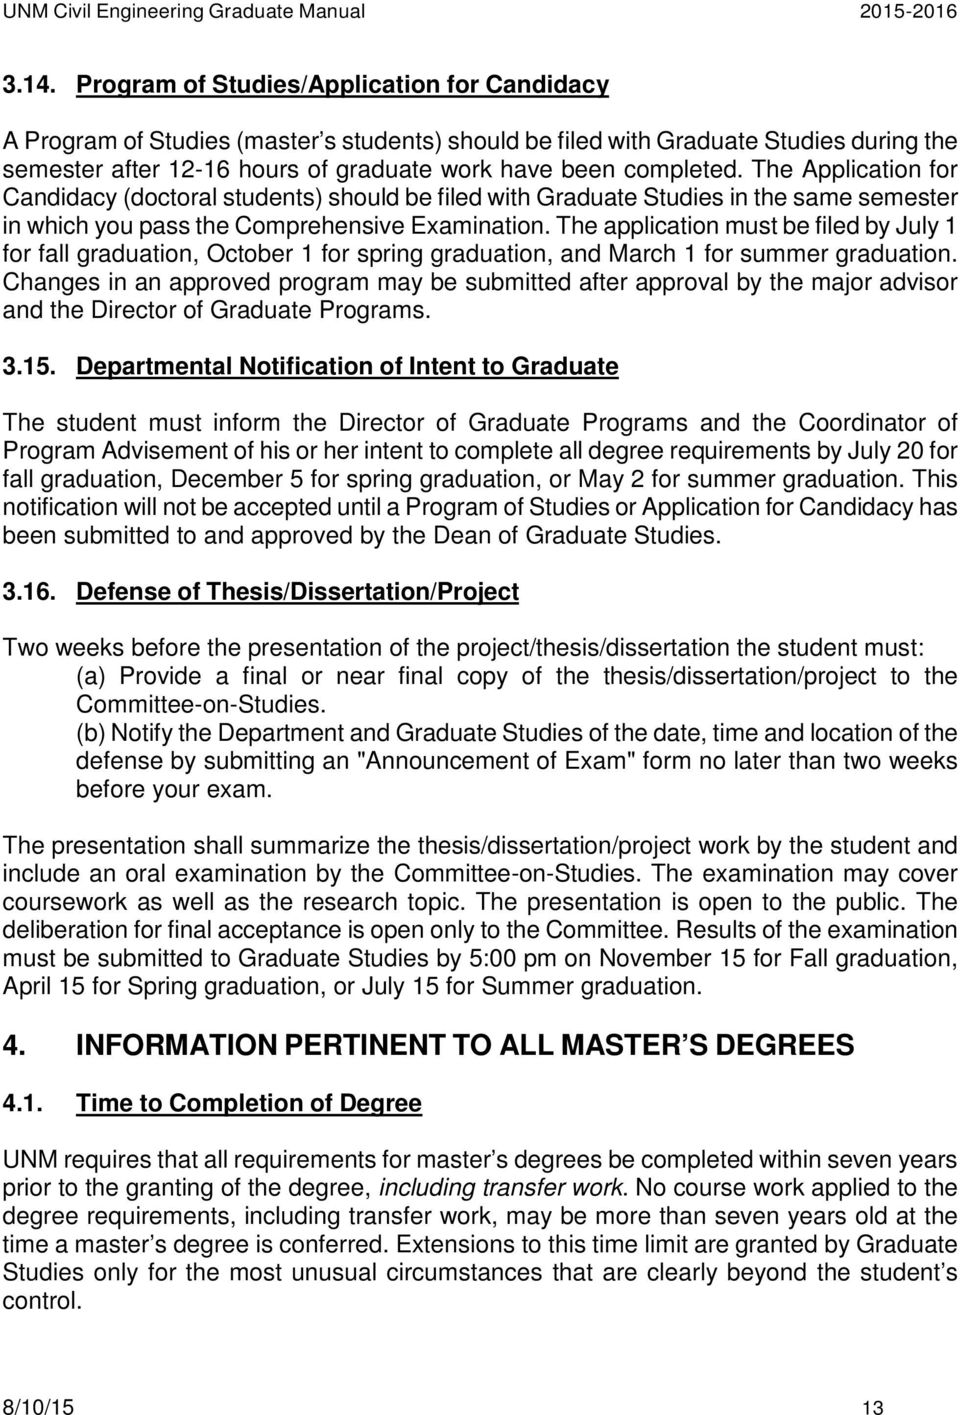 The application must be filed by July 1 for fall graduation, October 1 for spring graduation, and March 1 for summer graduation.